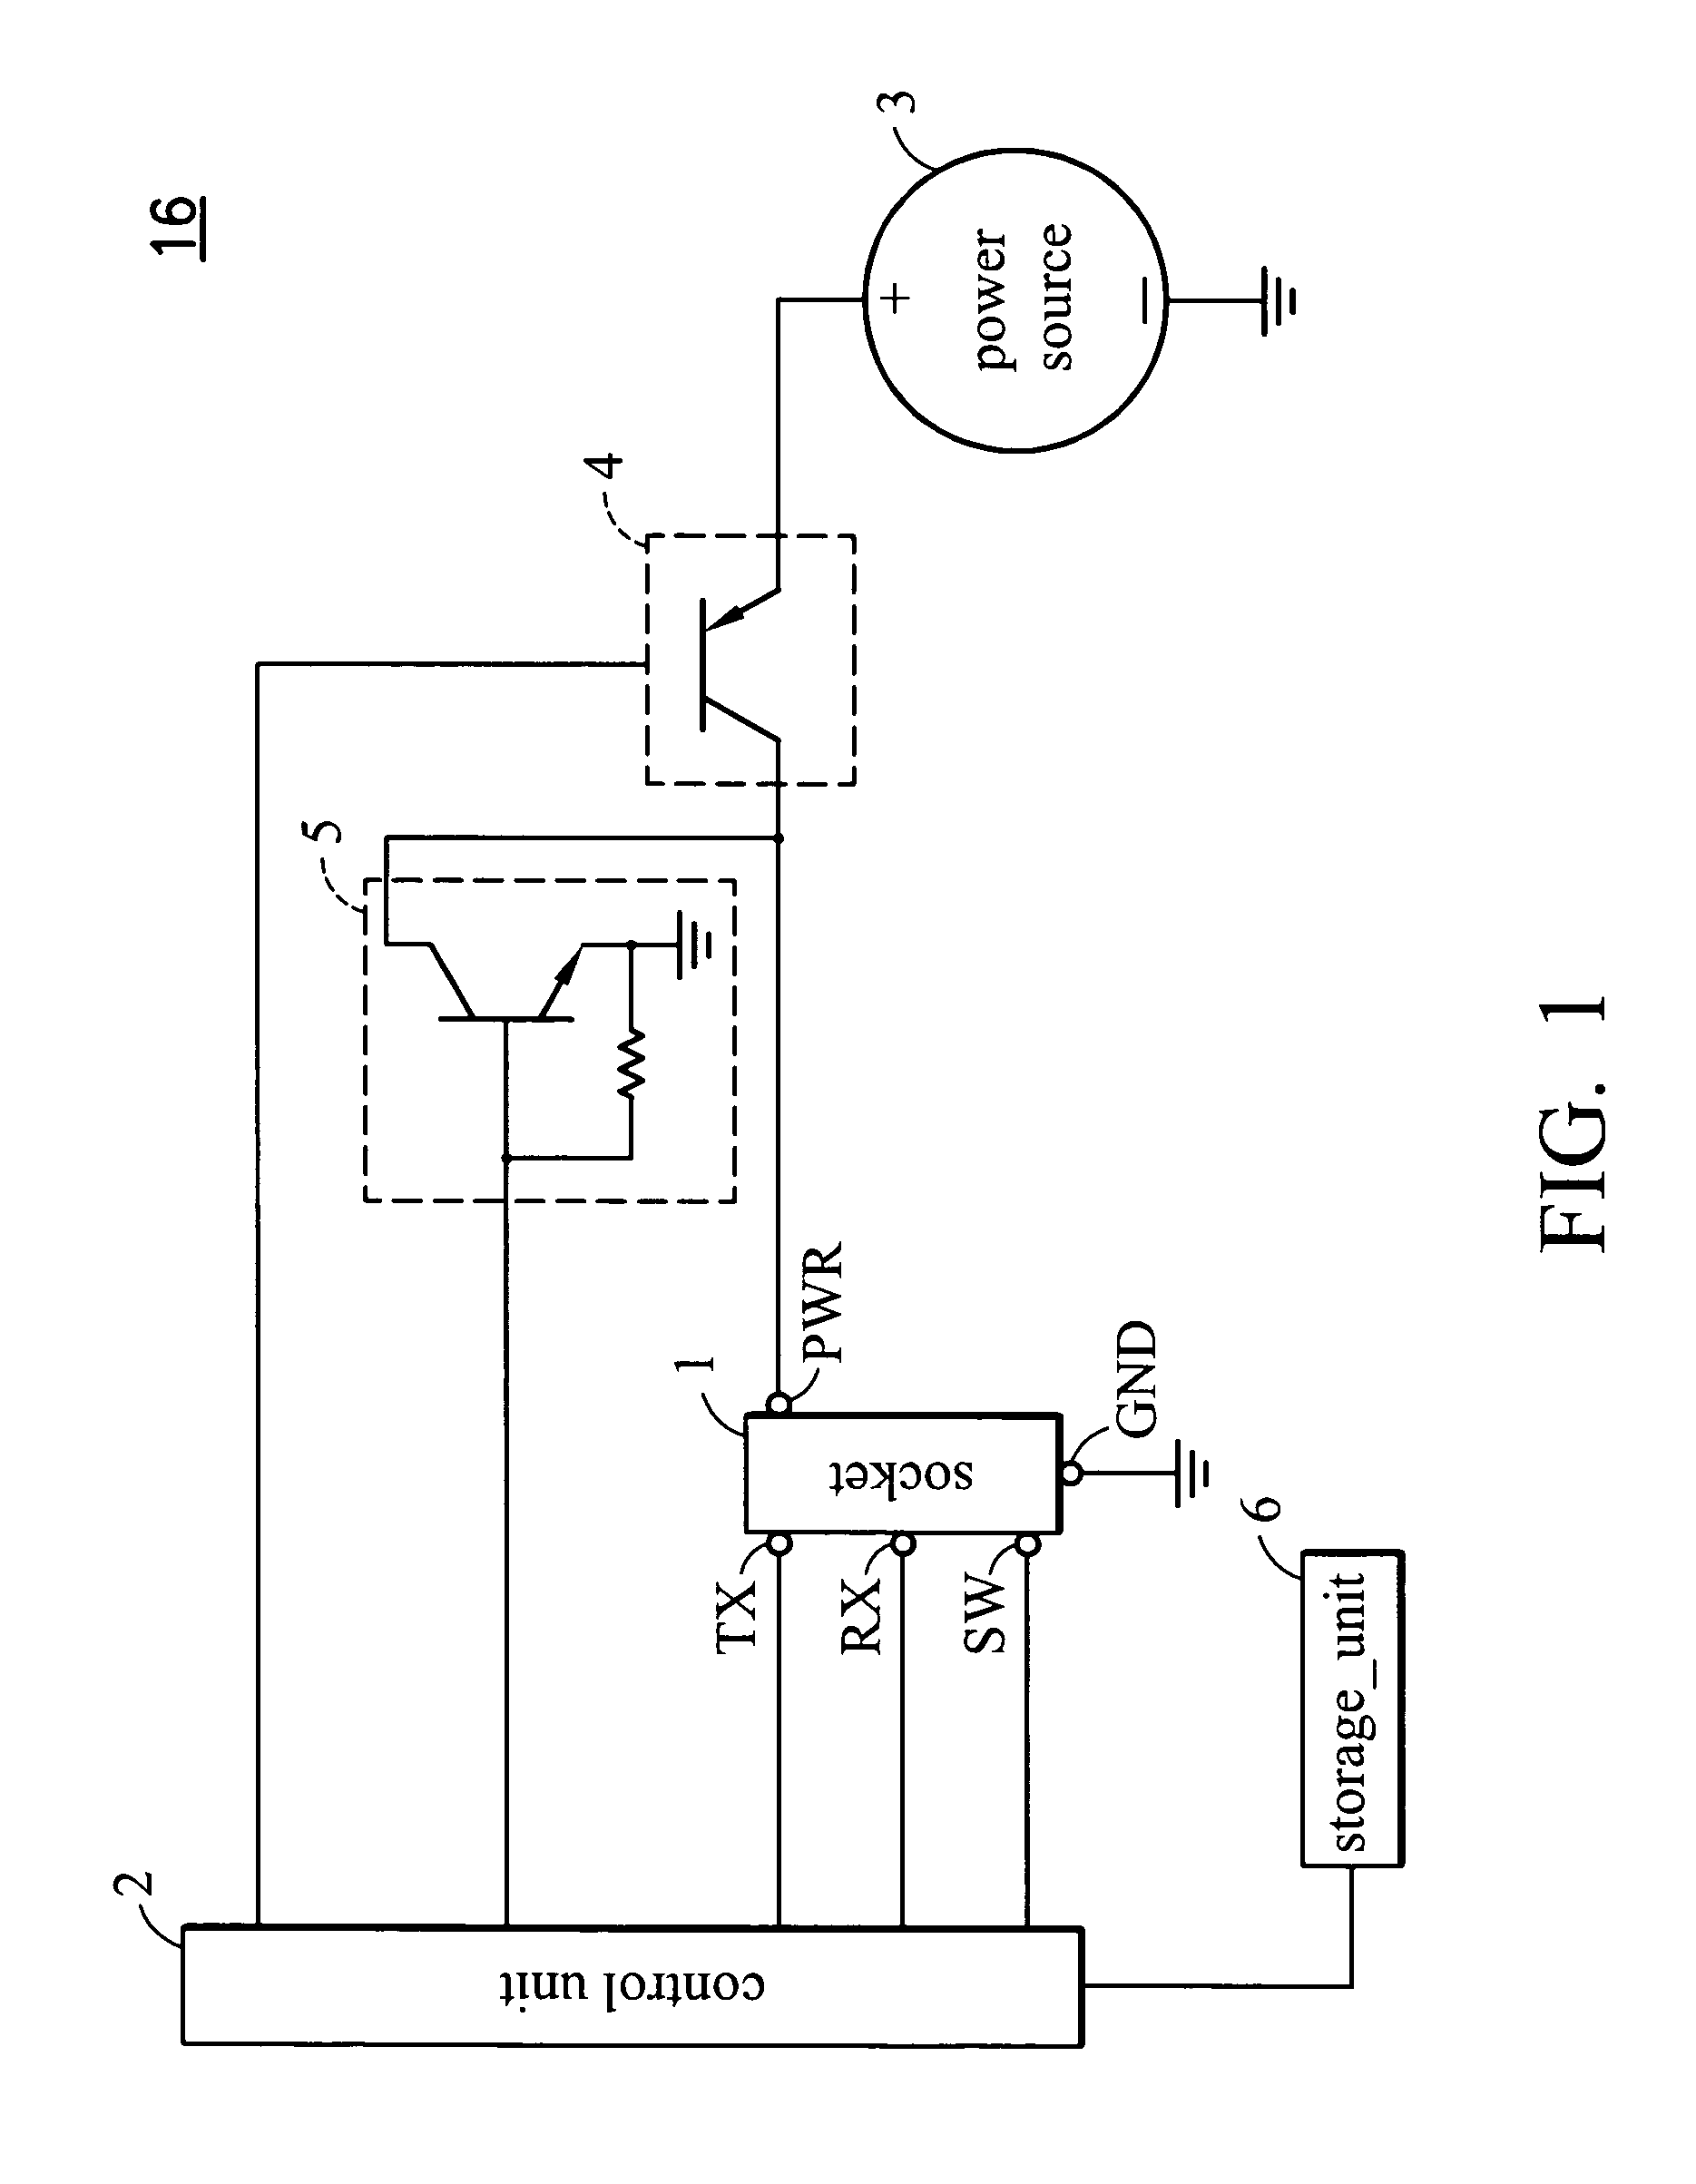 Interface for peripheral device detection